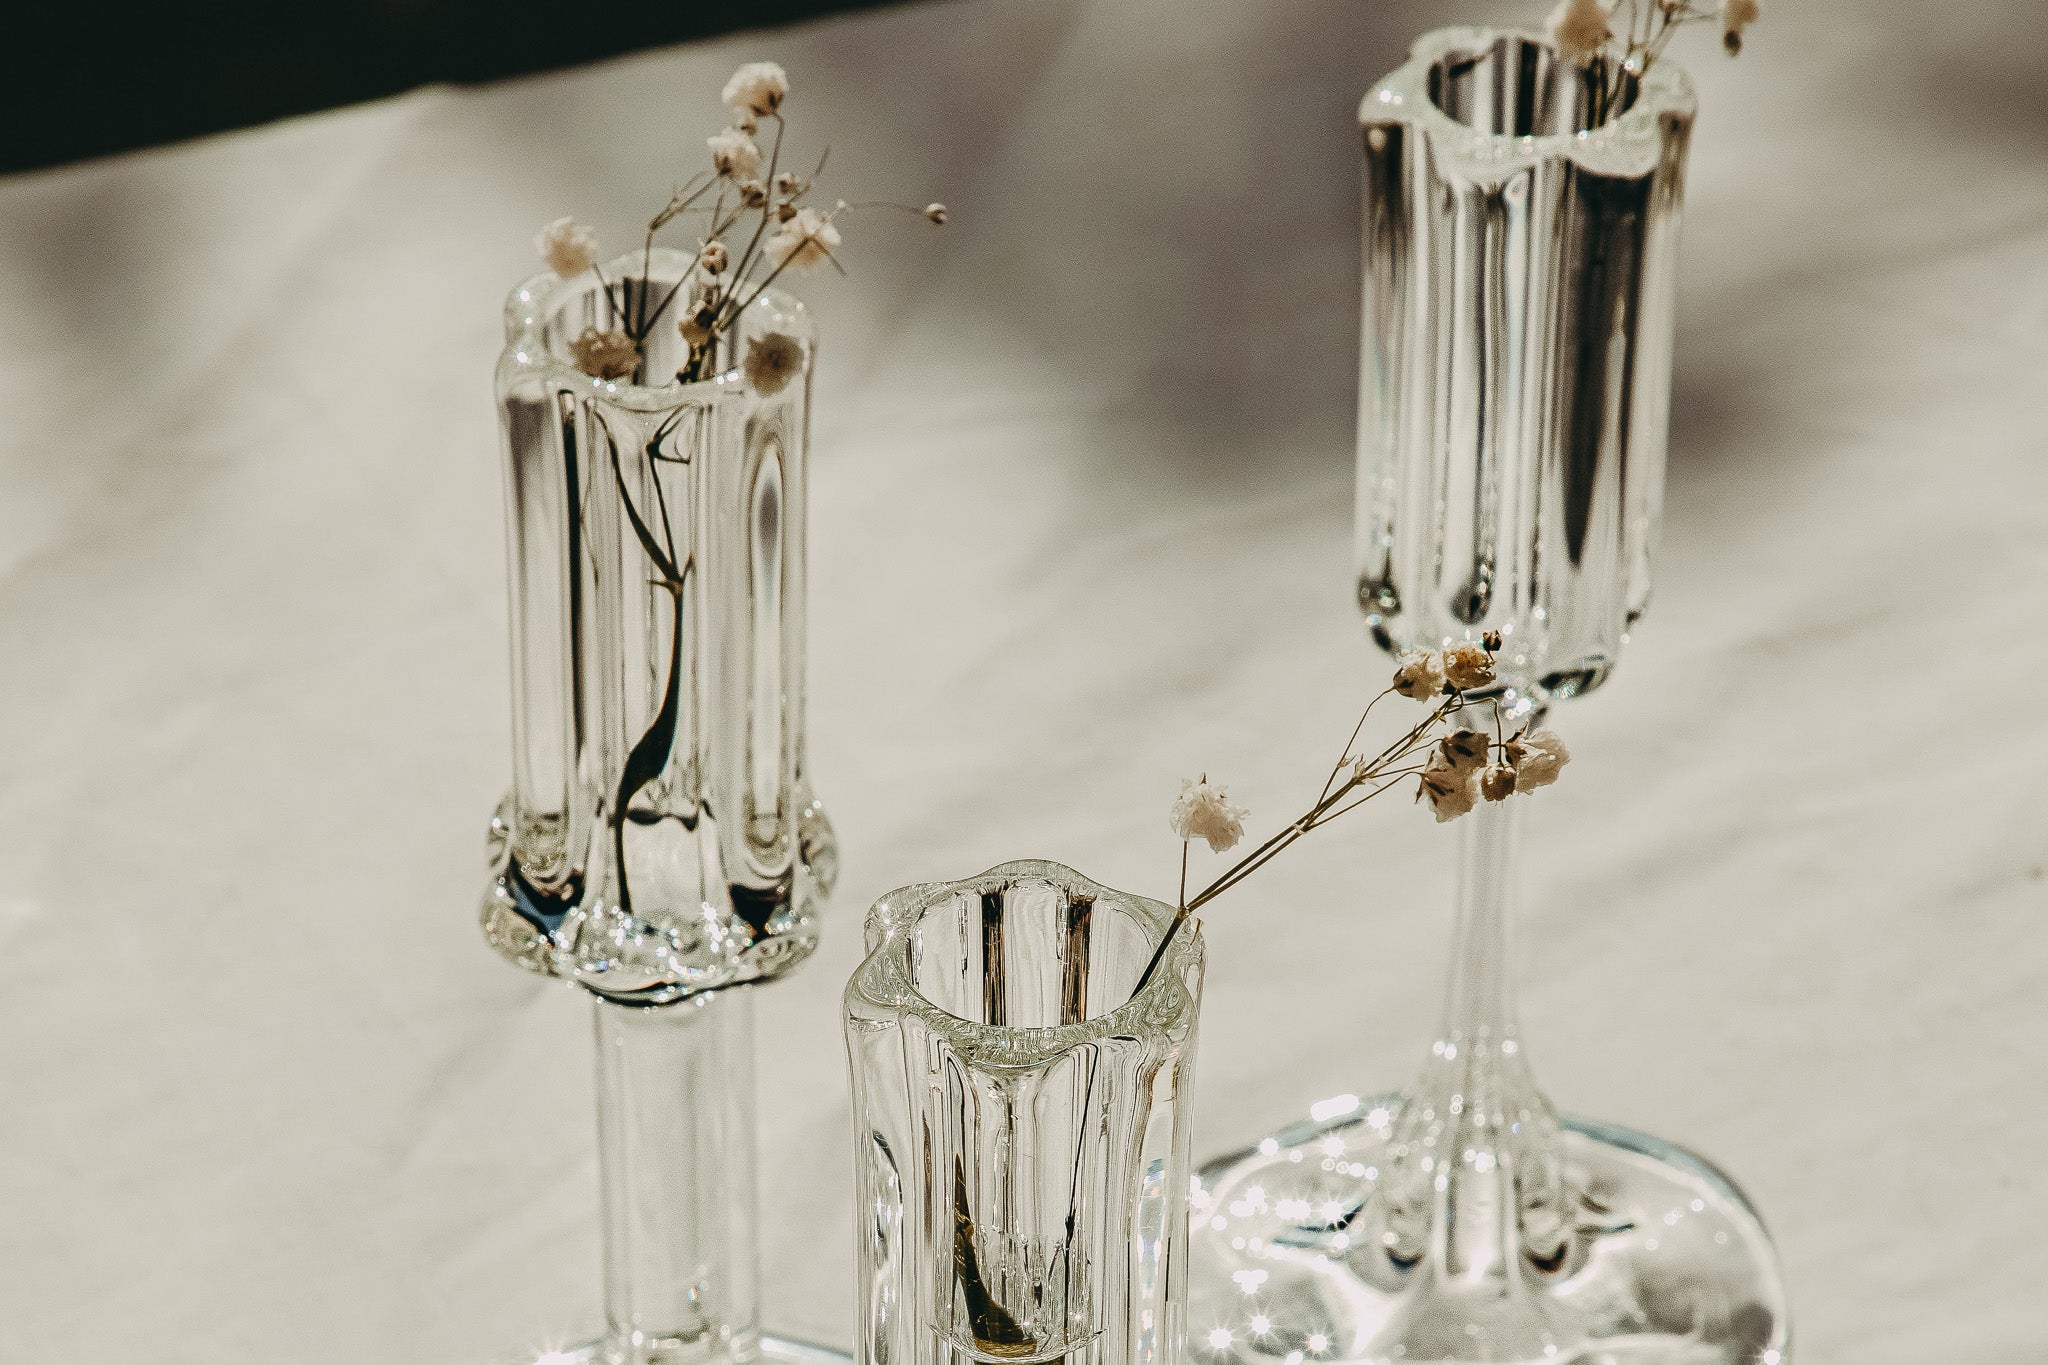 Modern Taper Candle Holders Guaranteed to Add Instant Ambiance to Your Home